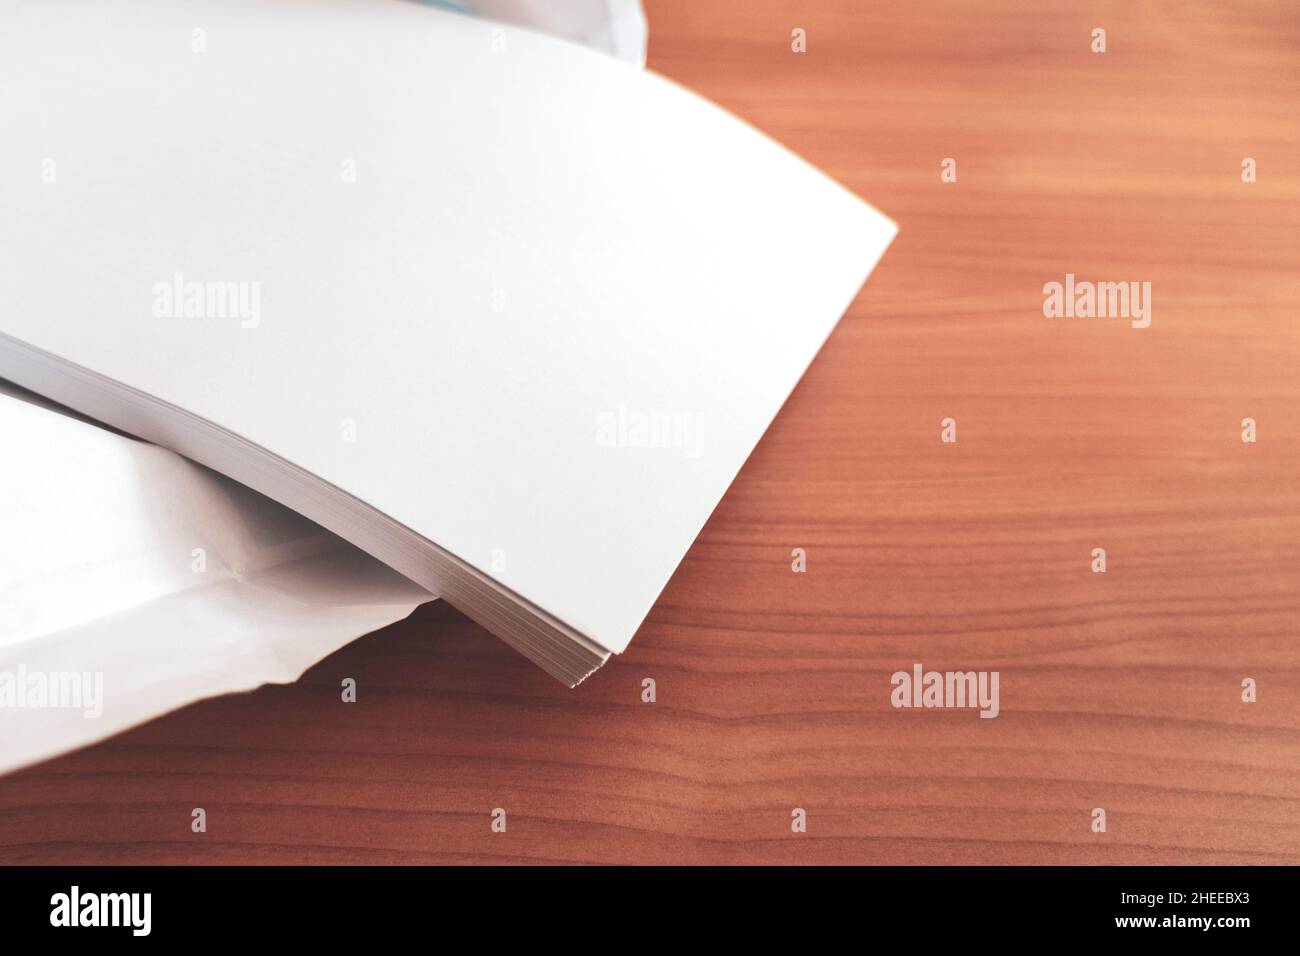 printing and photocopy paper. stack of sheets of a pack of office paper on a table. paper for high volume printing and copying. Copy space Stock Photo